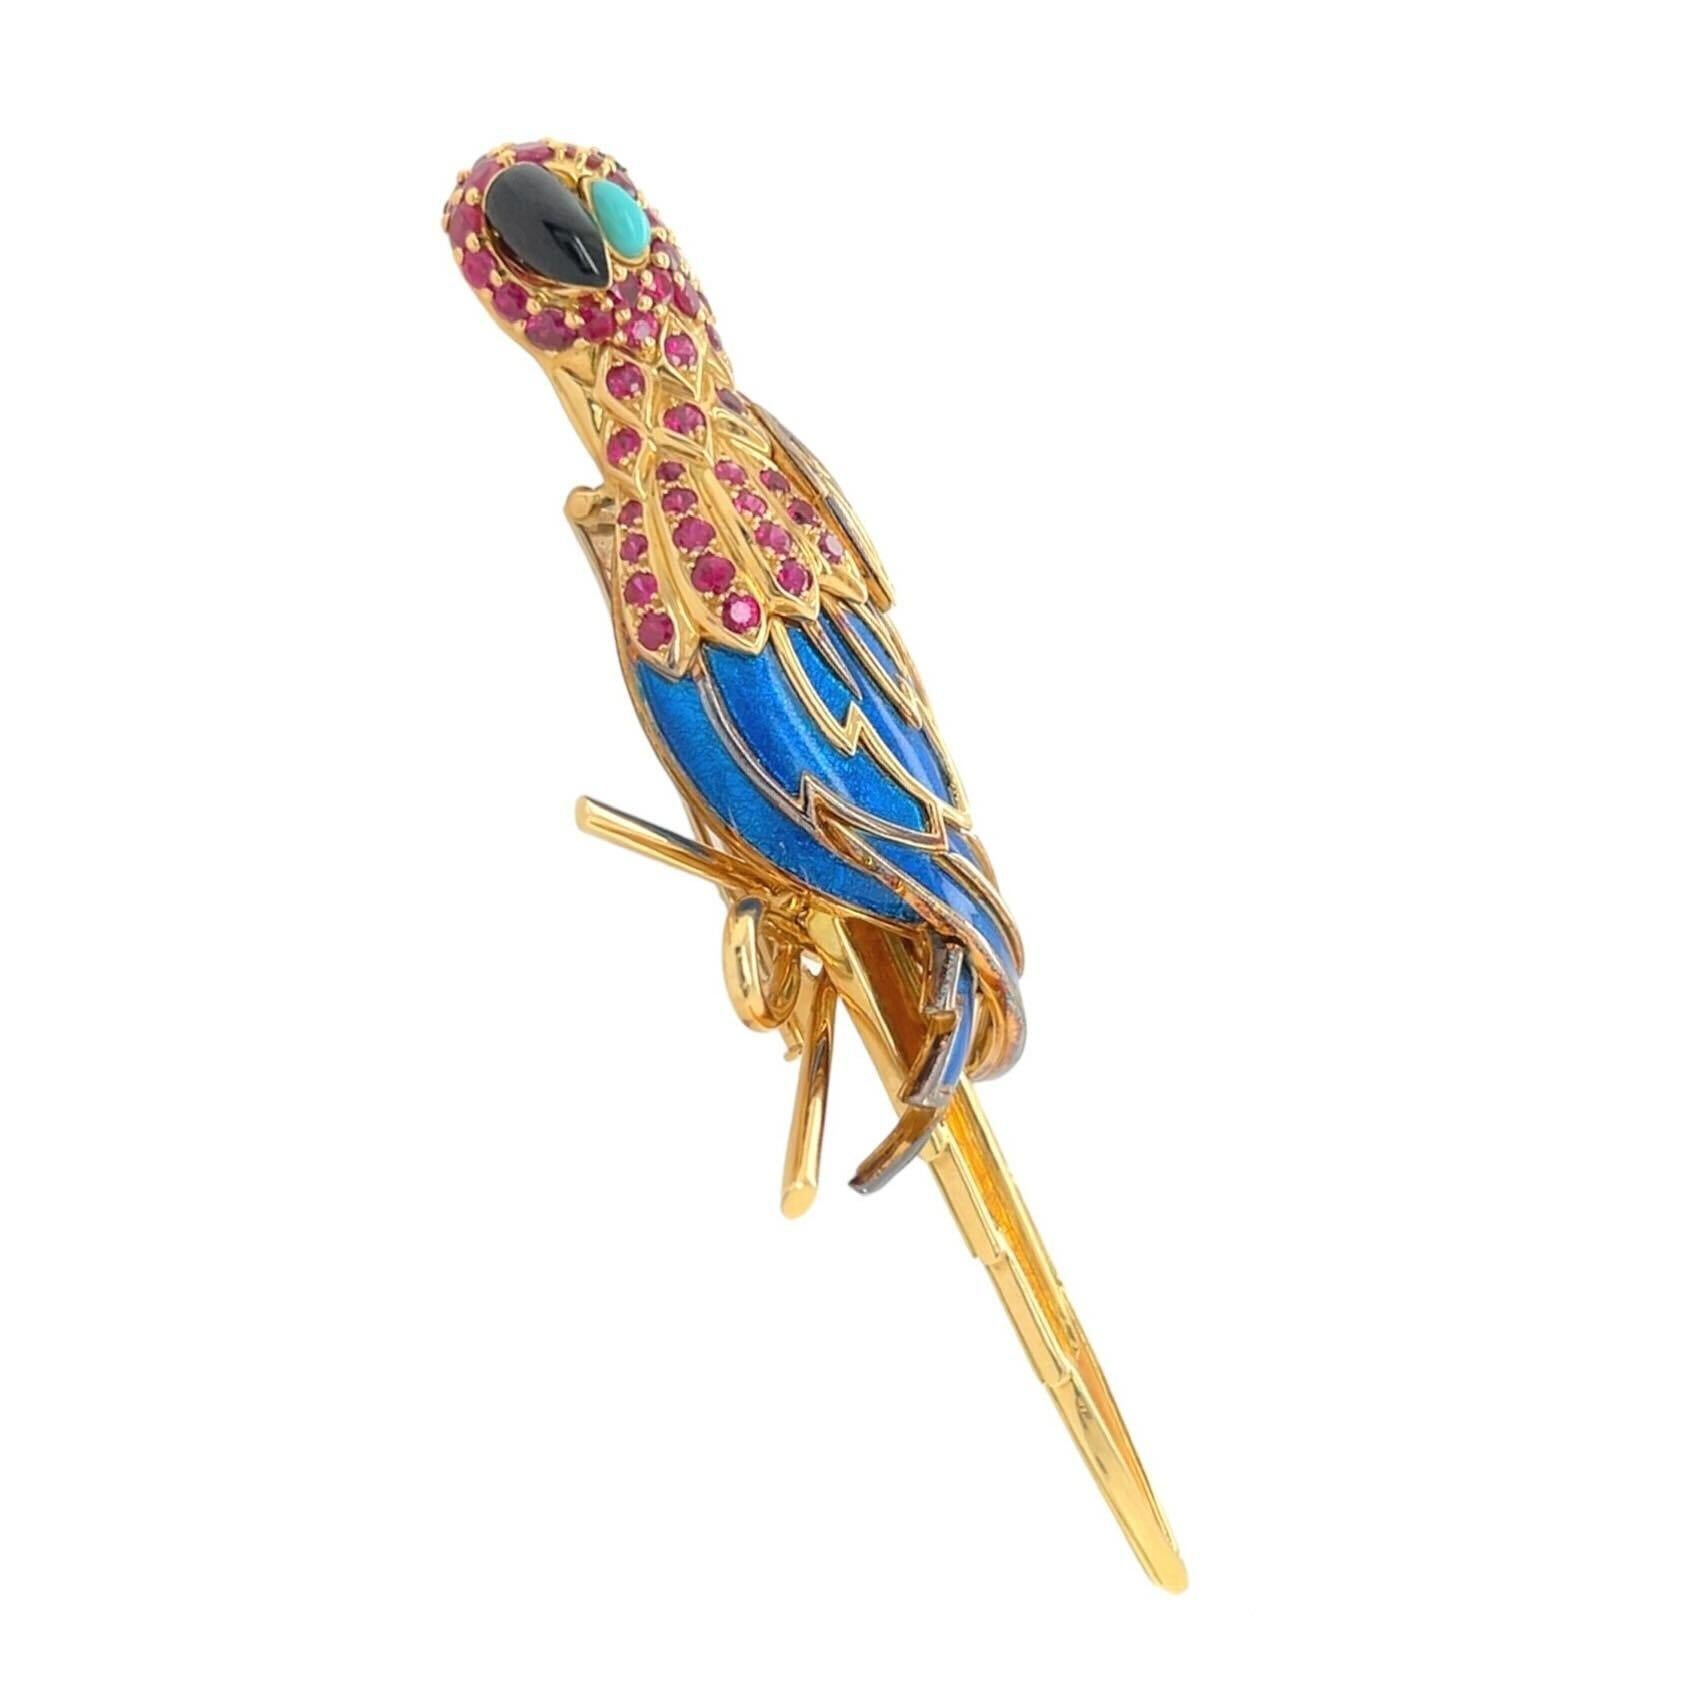  An 18 karat yellow gold, ruby, turquoise, emerald and enamel brooch, Jean Schlumberger, Tiffany & Co., France.  Designed as a parrot, its head set with approximately ninety three (93) round faceted rubies weighing approximately 10.71 carats total